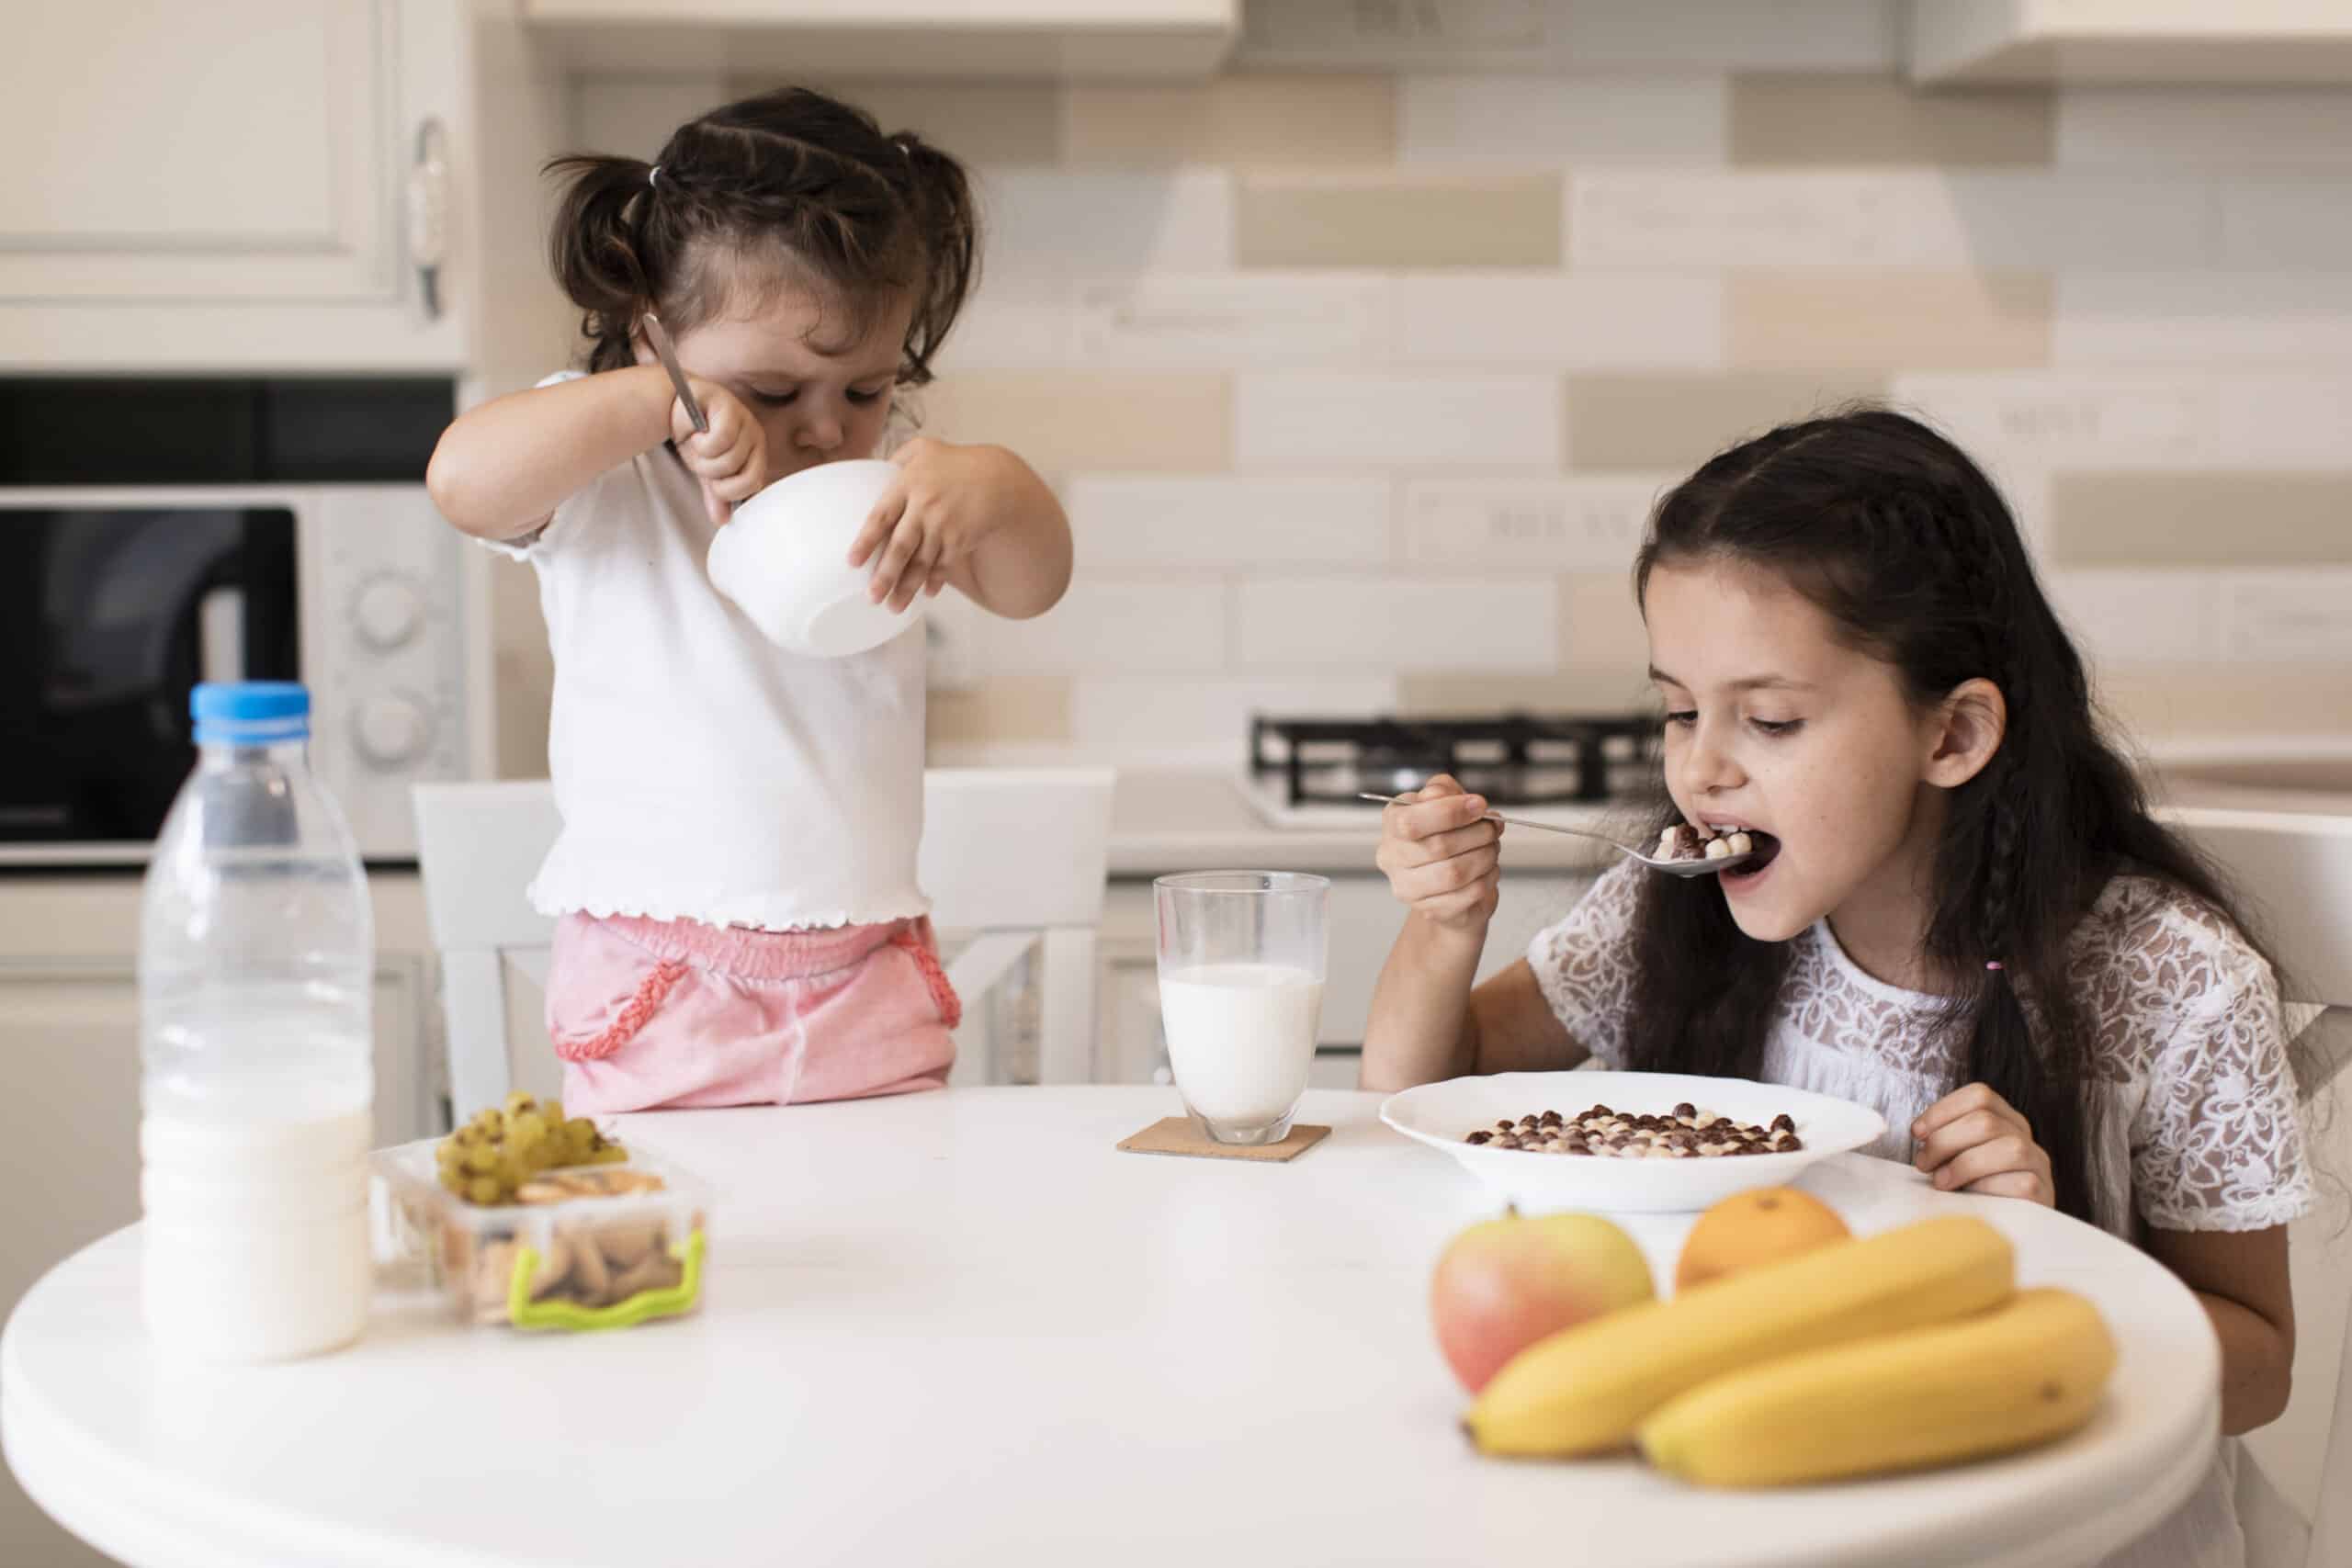 Nutritious Foods for Your Child's Health